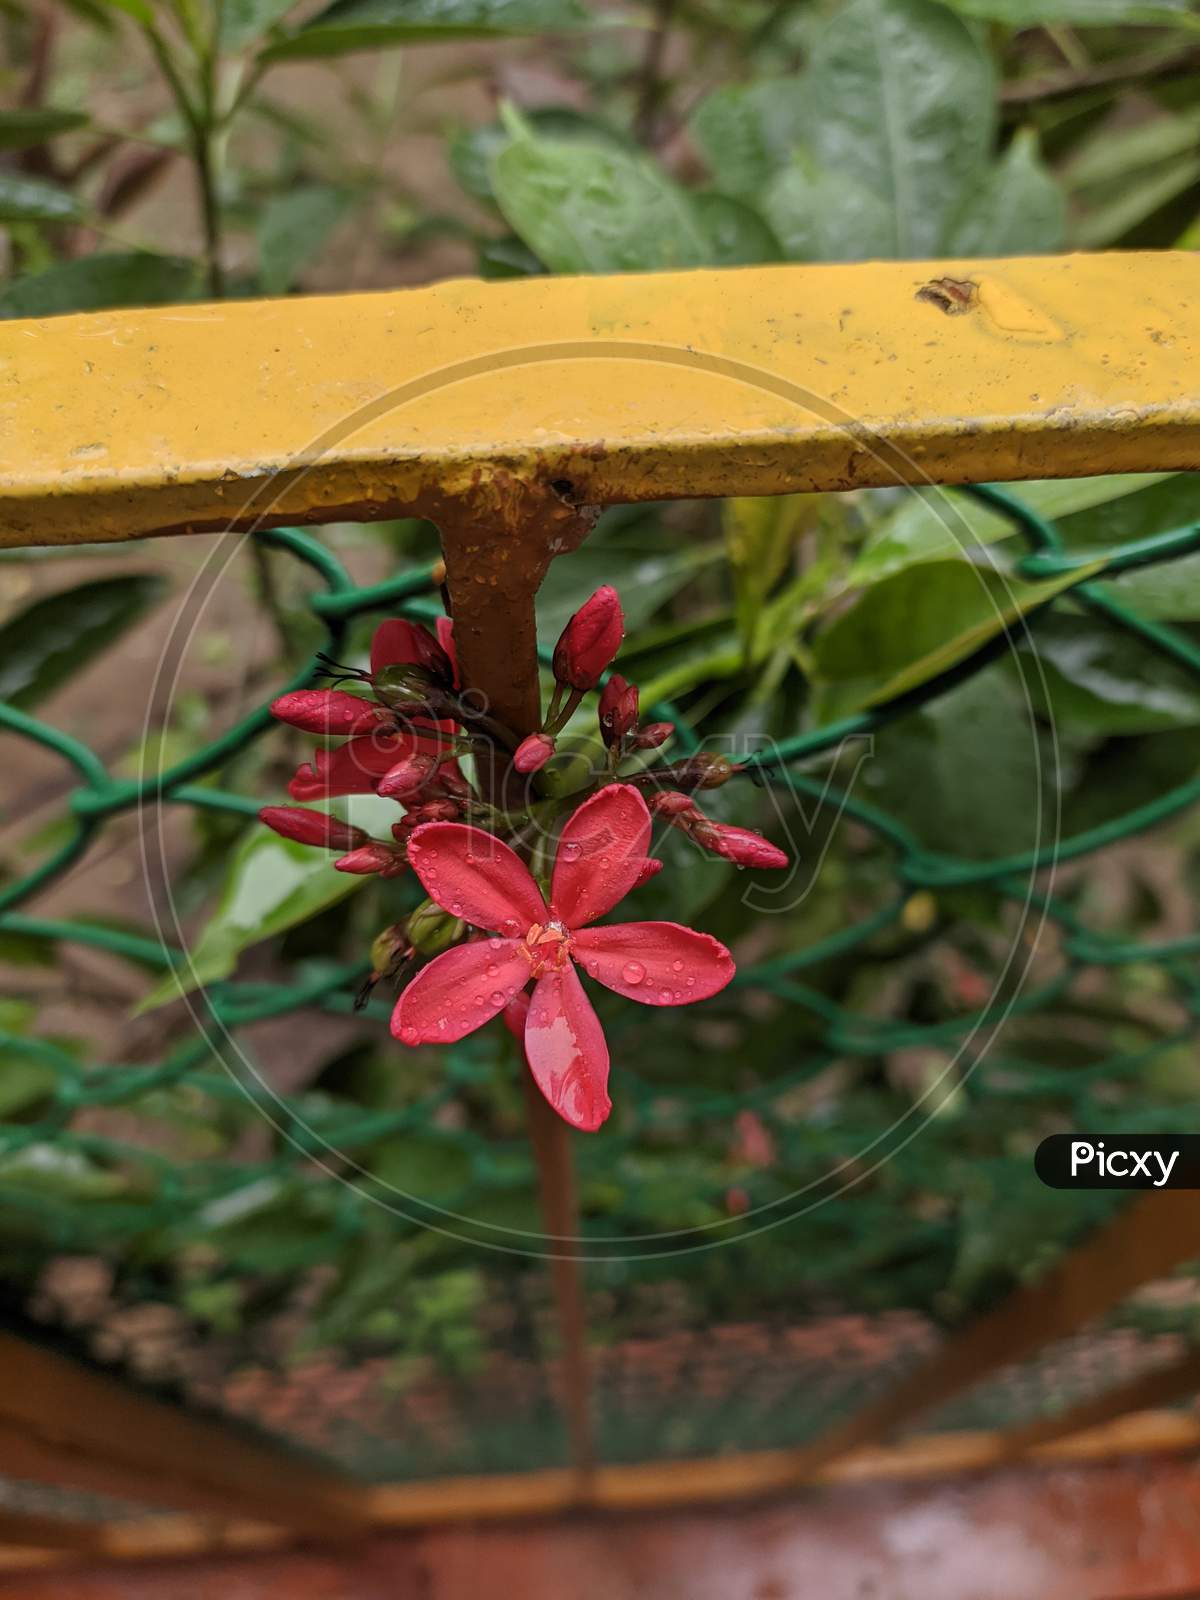 Monsoon Water Drops On Red Flower